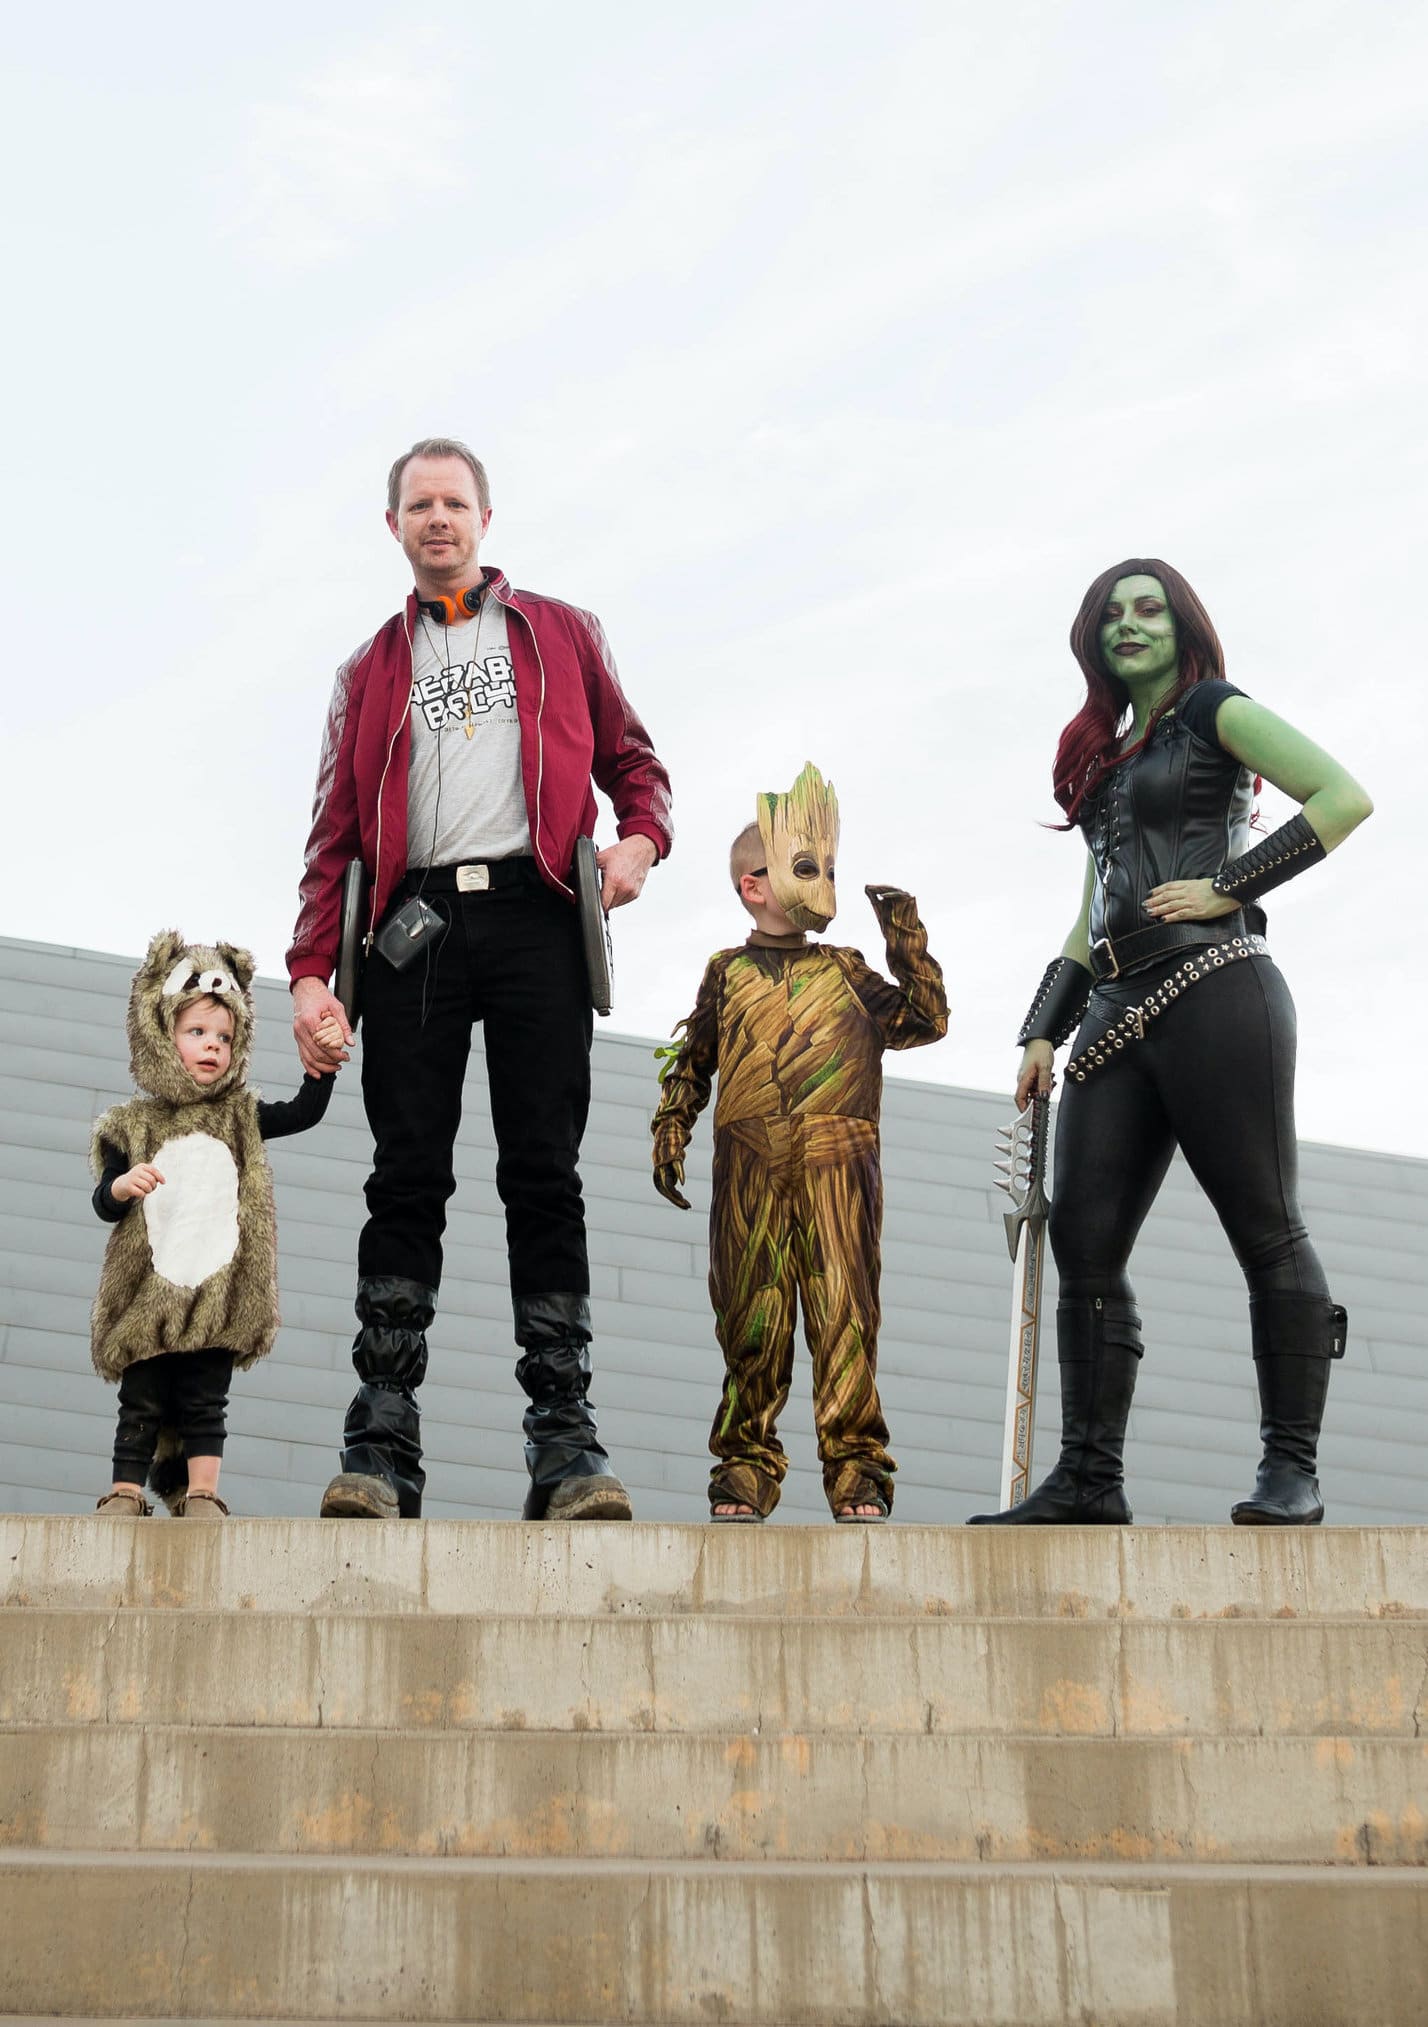 Guardians of the Galaxy costume. 